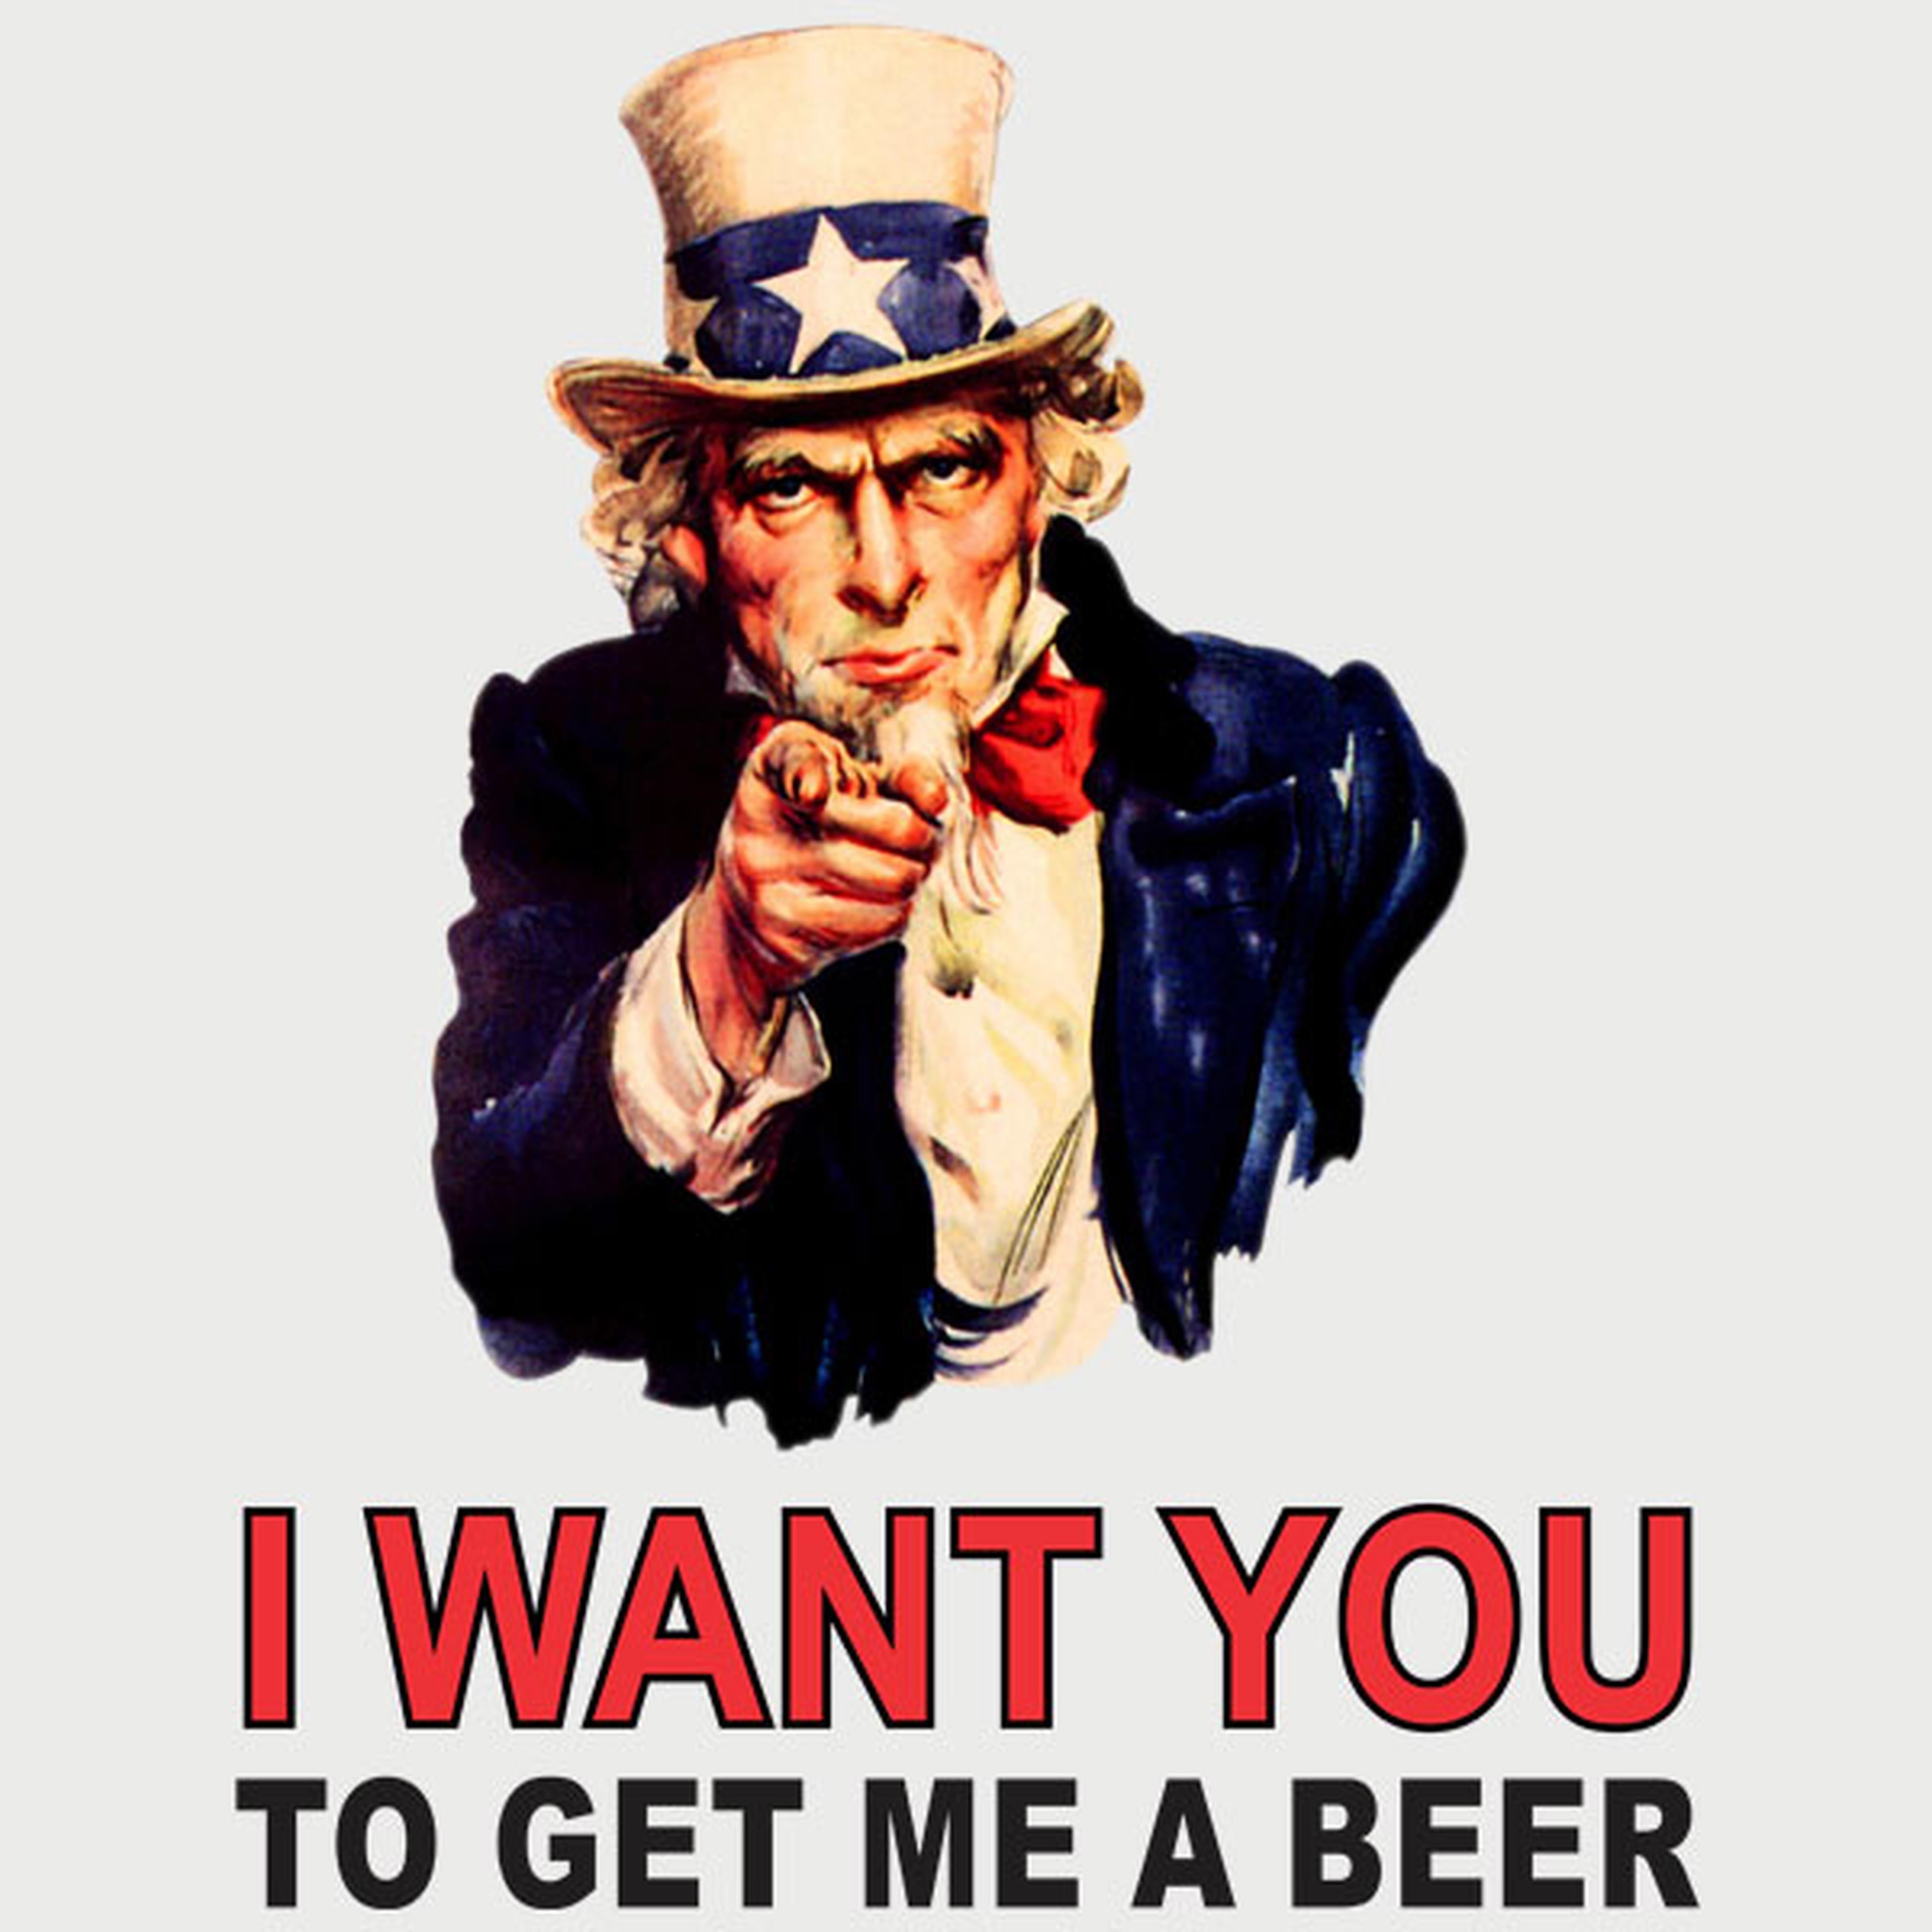 I want you to get me a beer